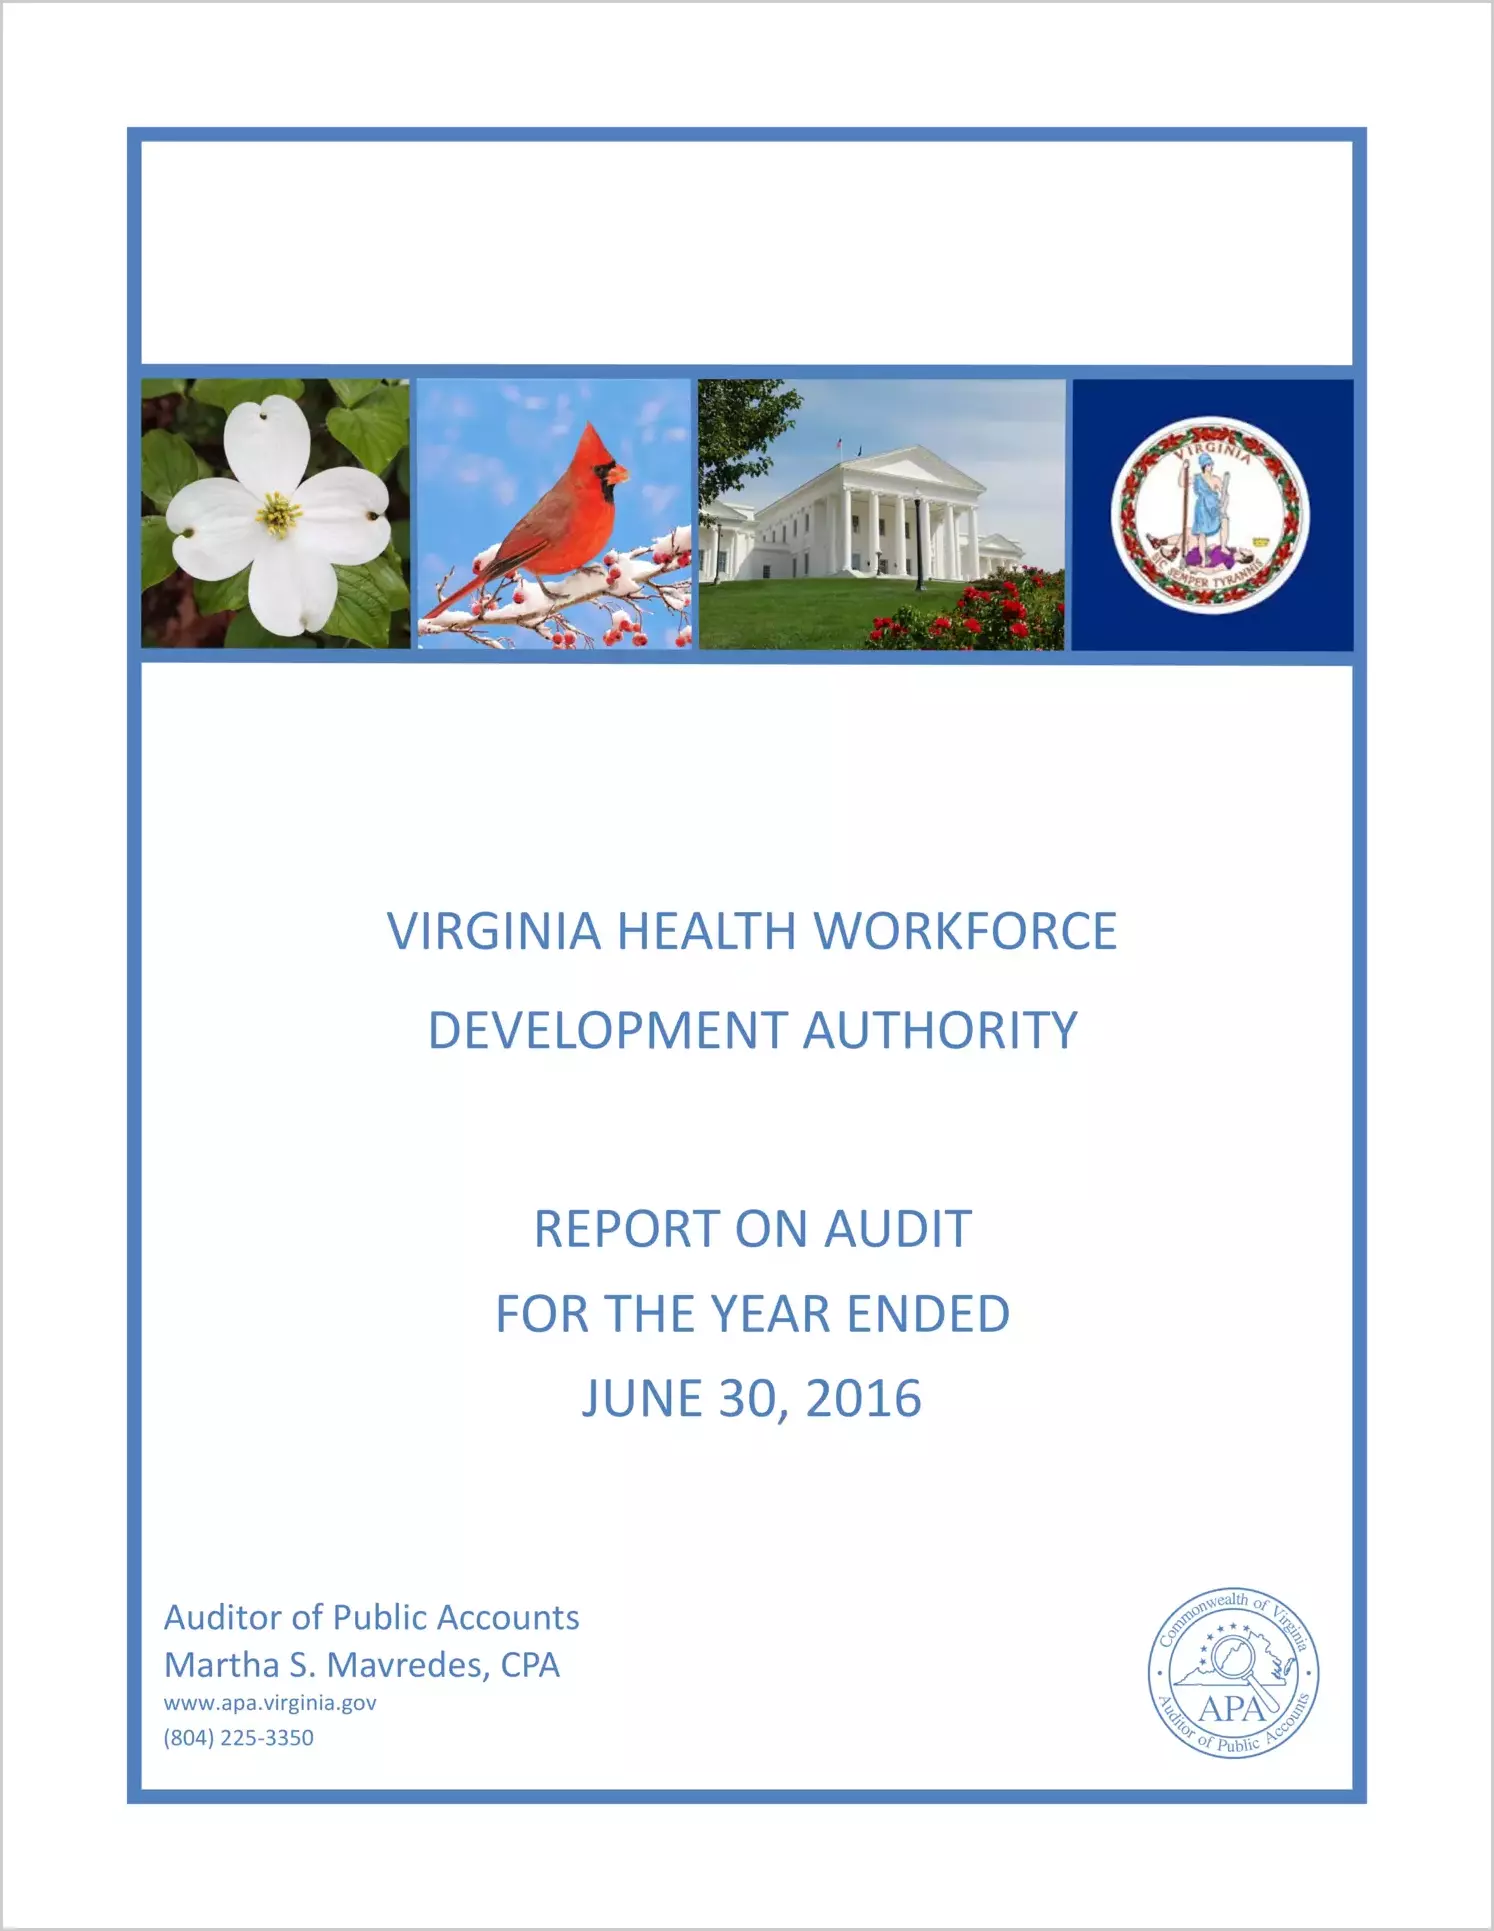 Virginia Health Workforce Development Authority for the year ended June 30, 2016